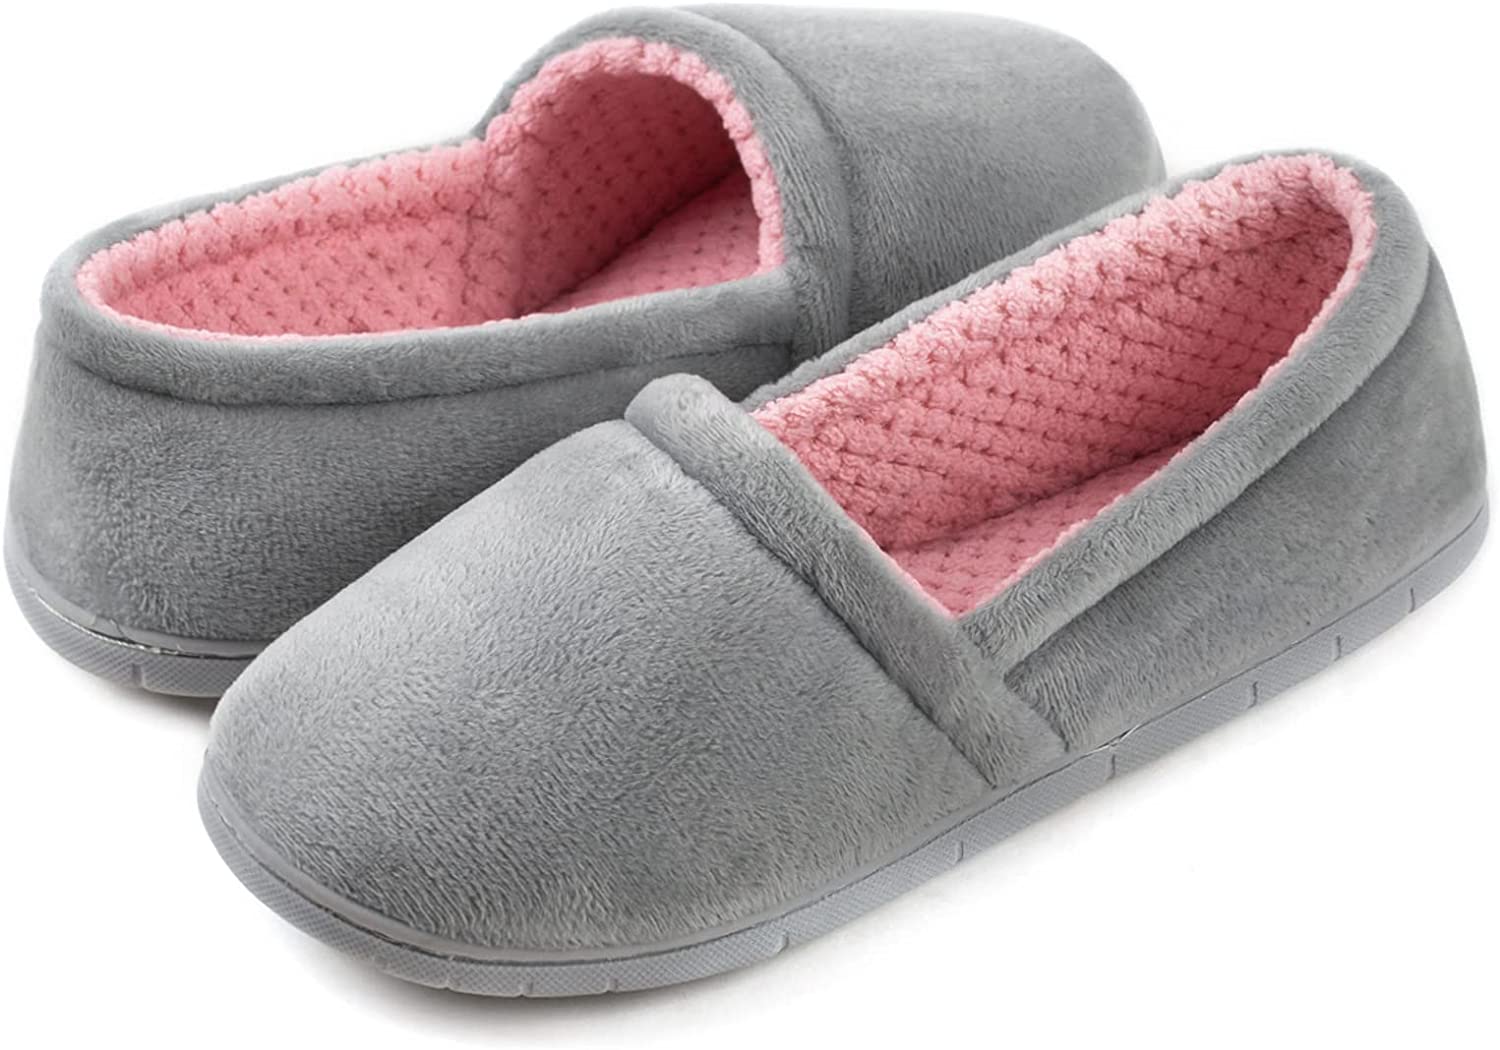 ULTRAIDEAS Women’s Comfy Lightweight Slippers Non-Slip House Shoes for Indoor & Outdoor 